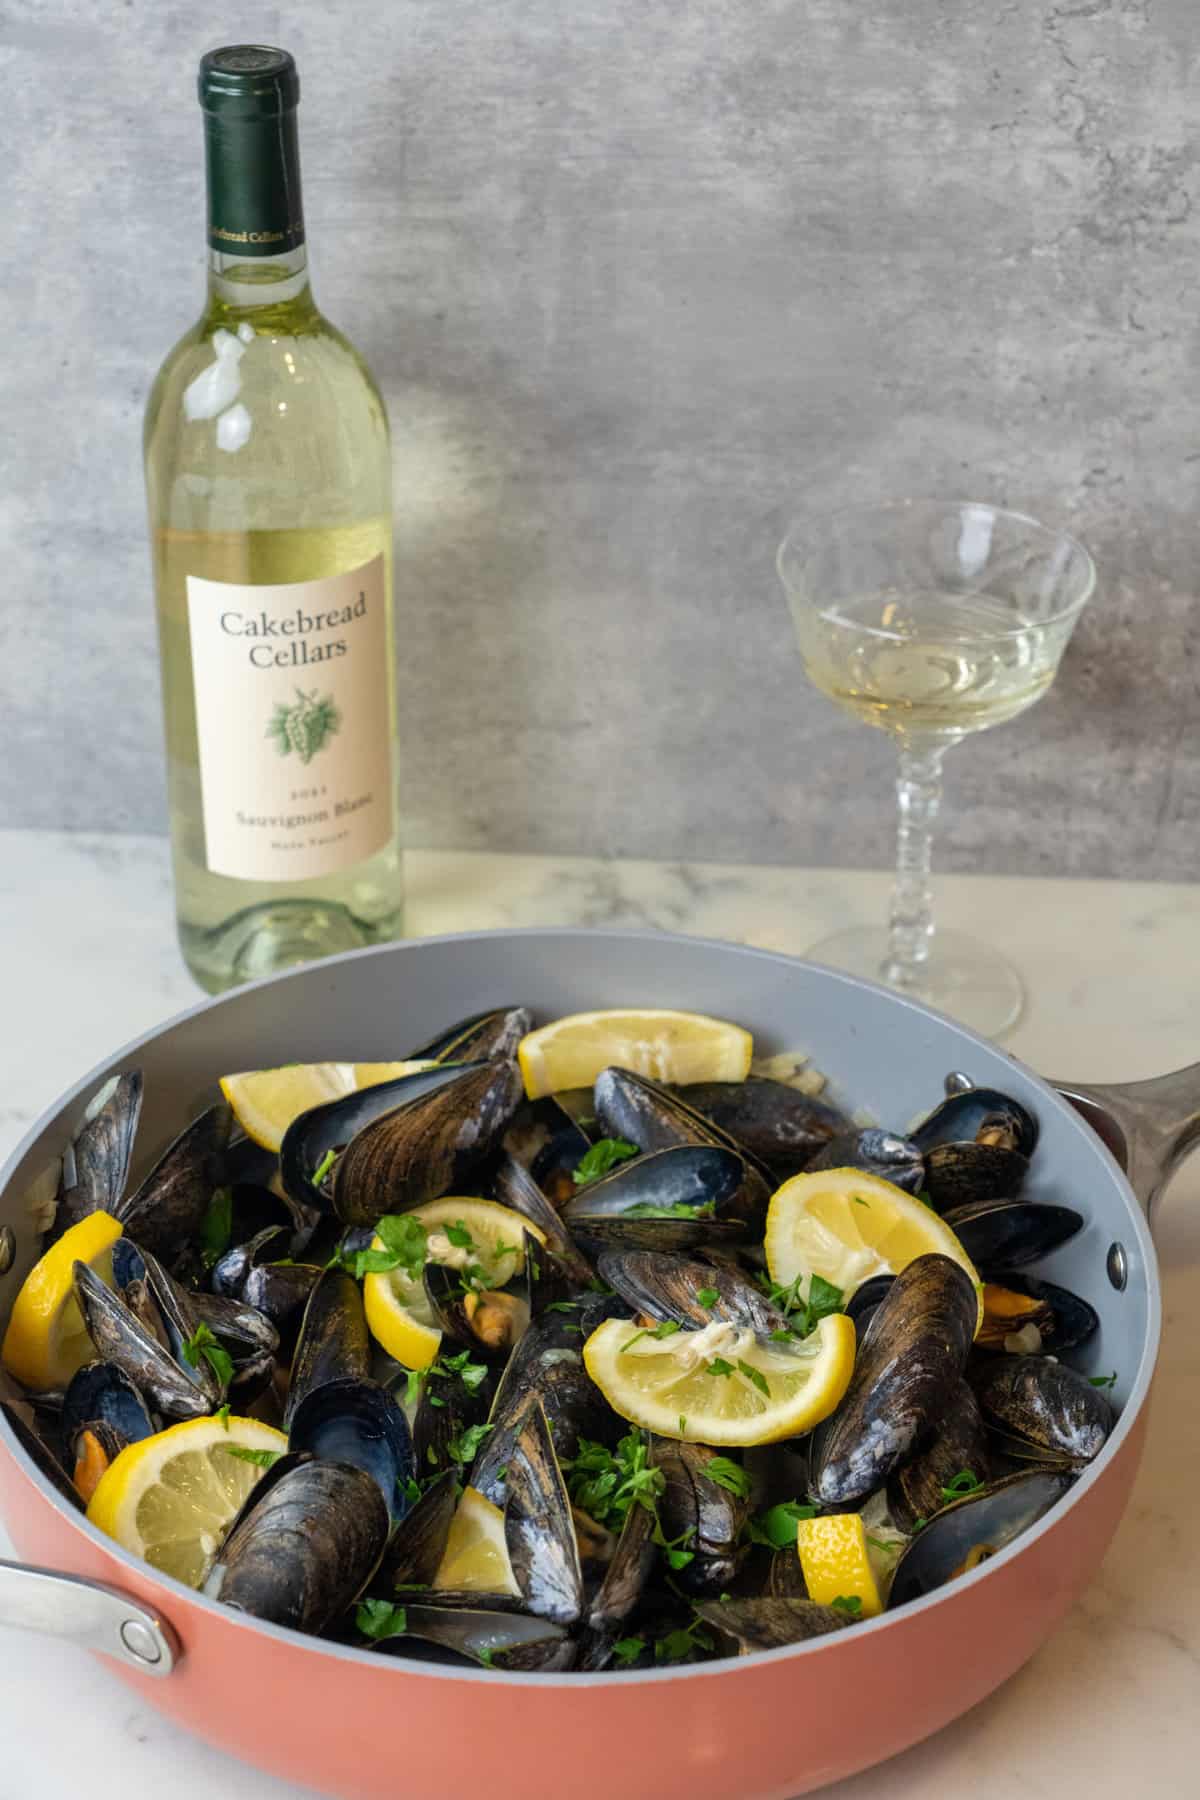 These Butter Garlic Mussels in White Wine Cream Sauce is made with mussels, butter, garlic cloves, onion, white wine, heavy cream, lemon, and parsley.